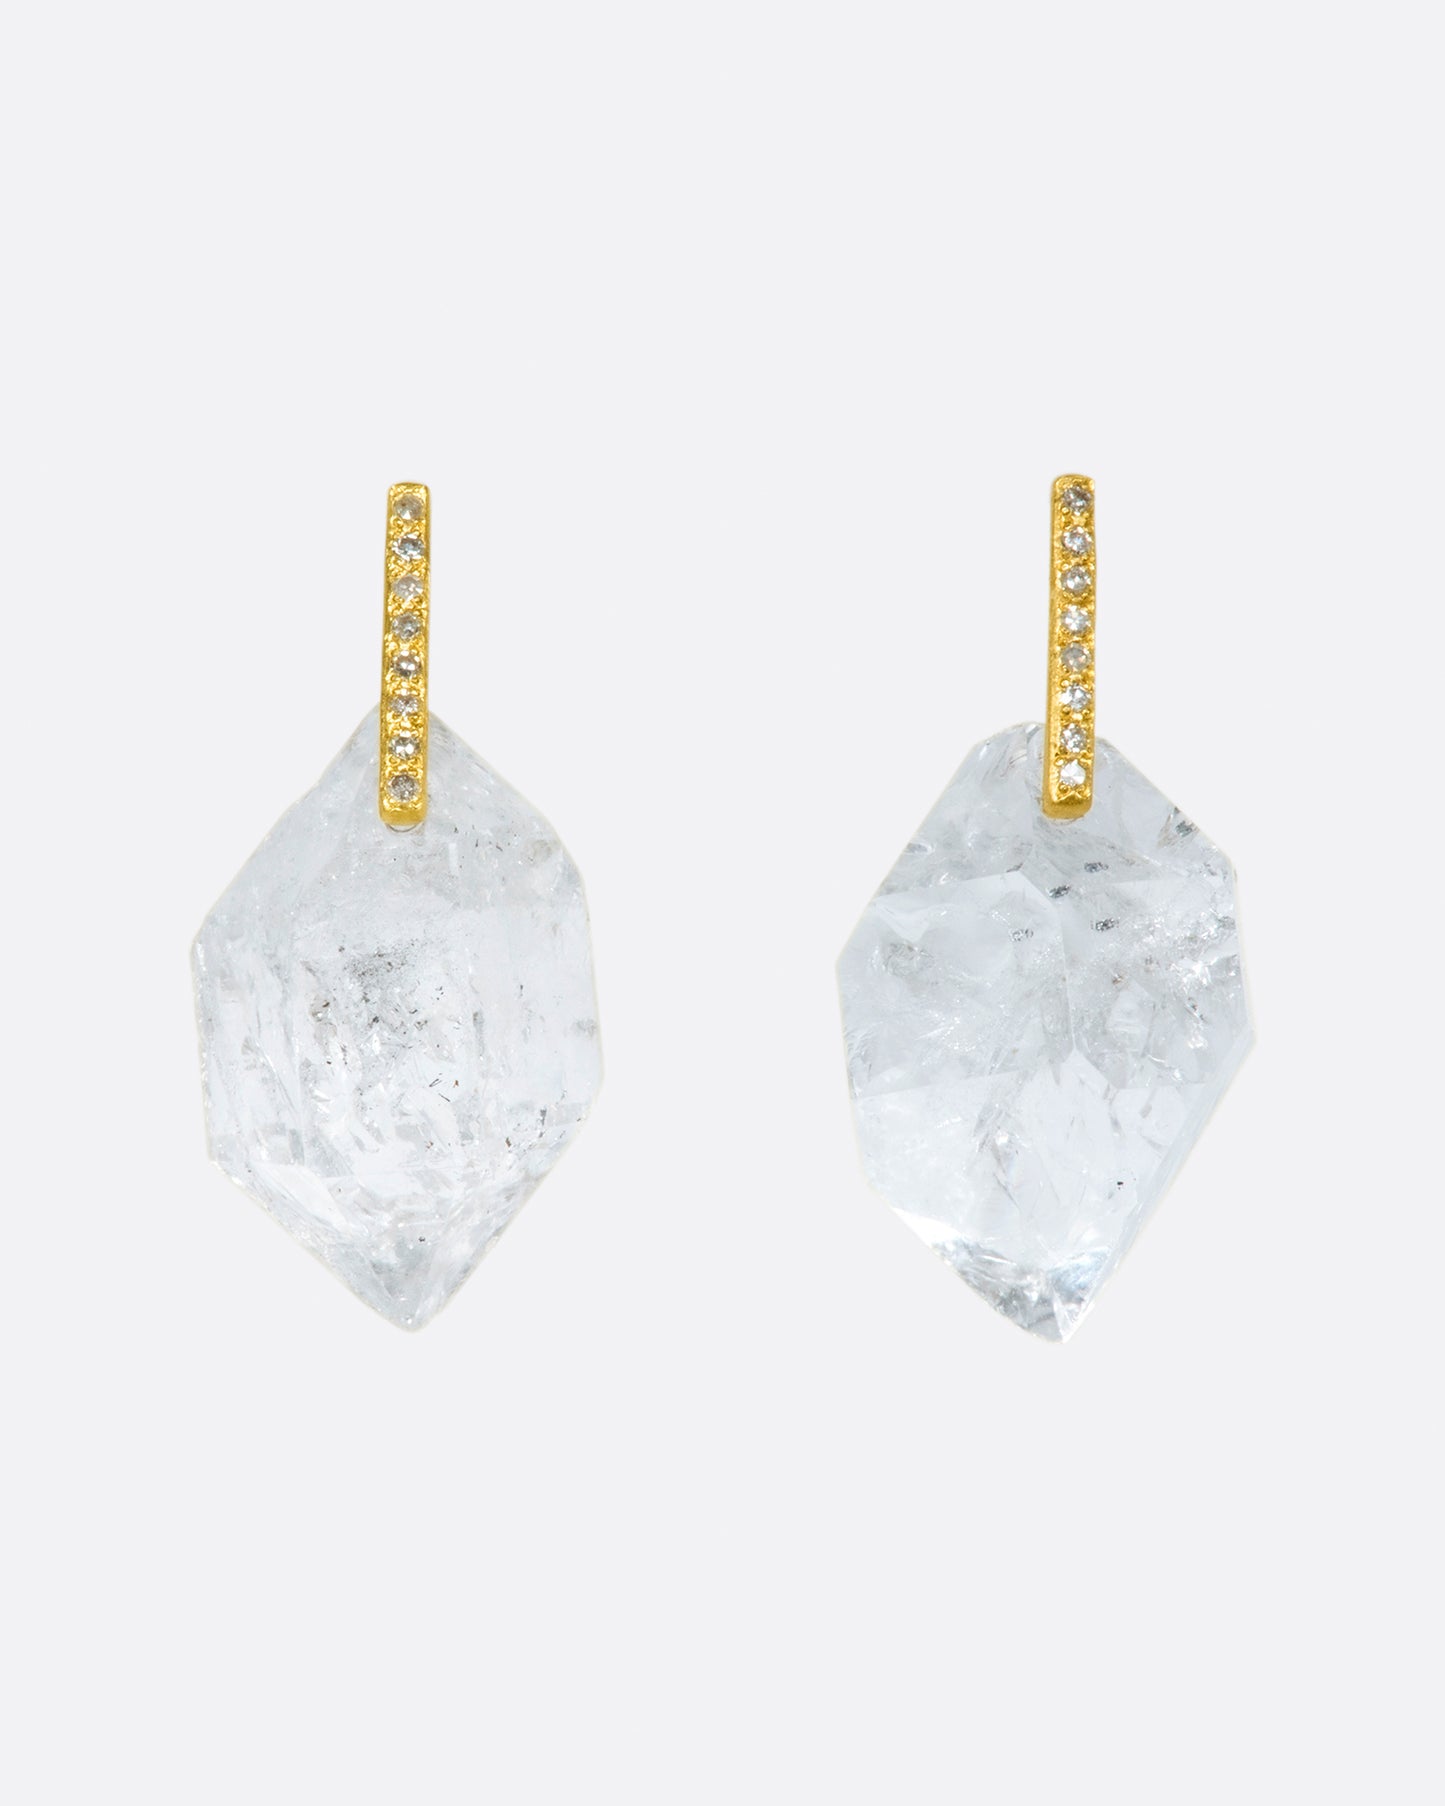 Save for their diamond-dotted posts, these earrings are about one thing and one thing only; their octahedron-like crystal drops.